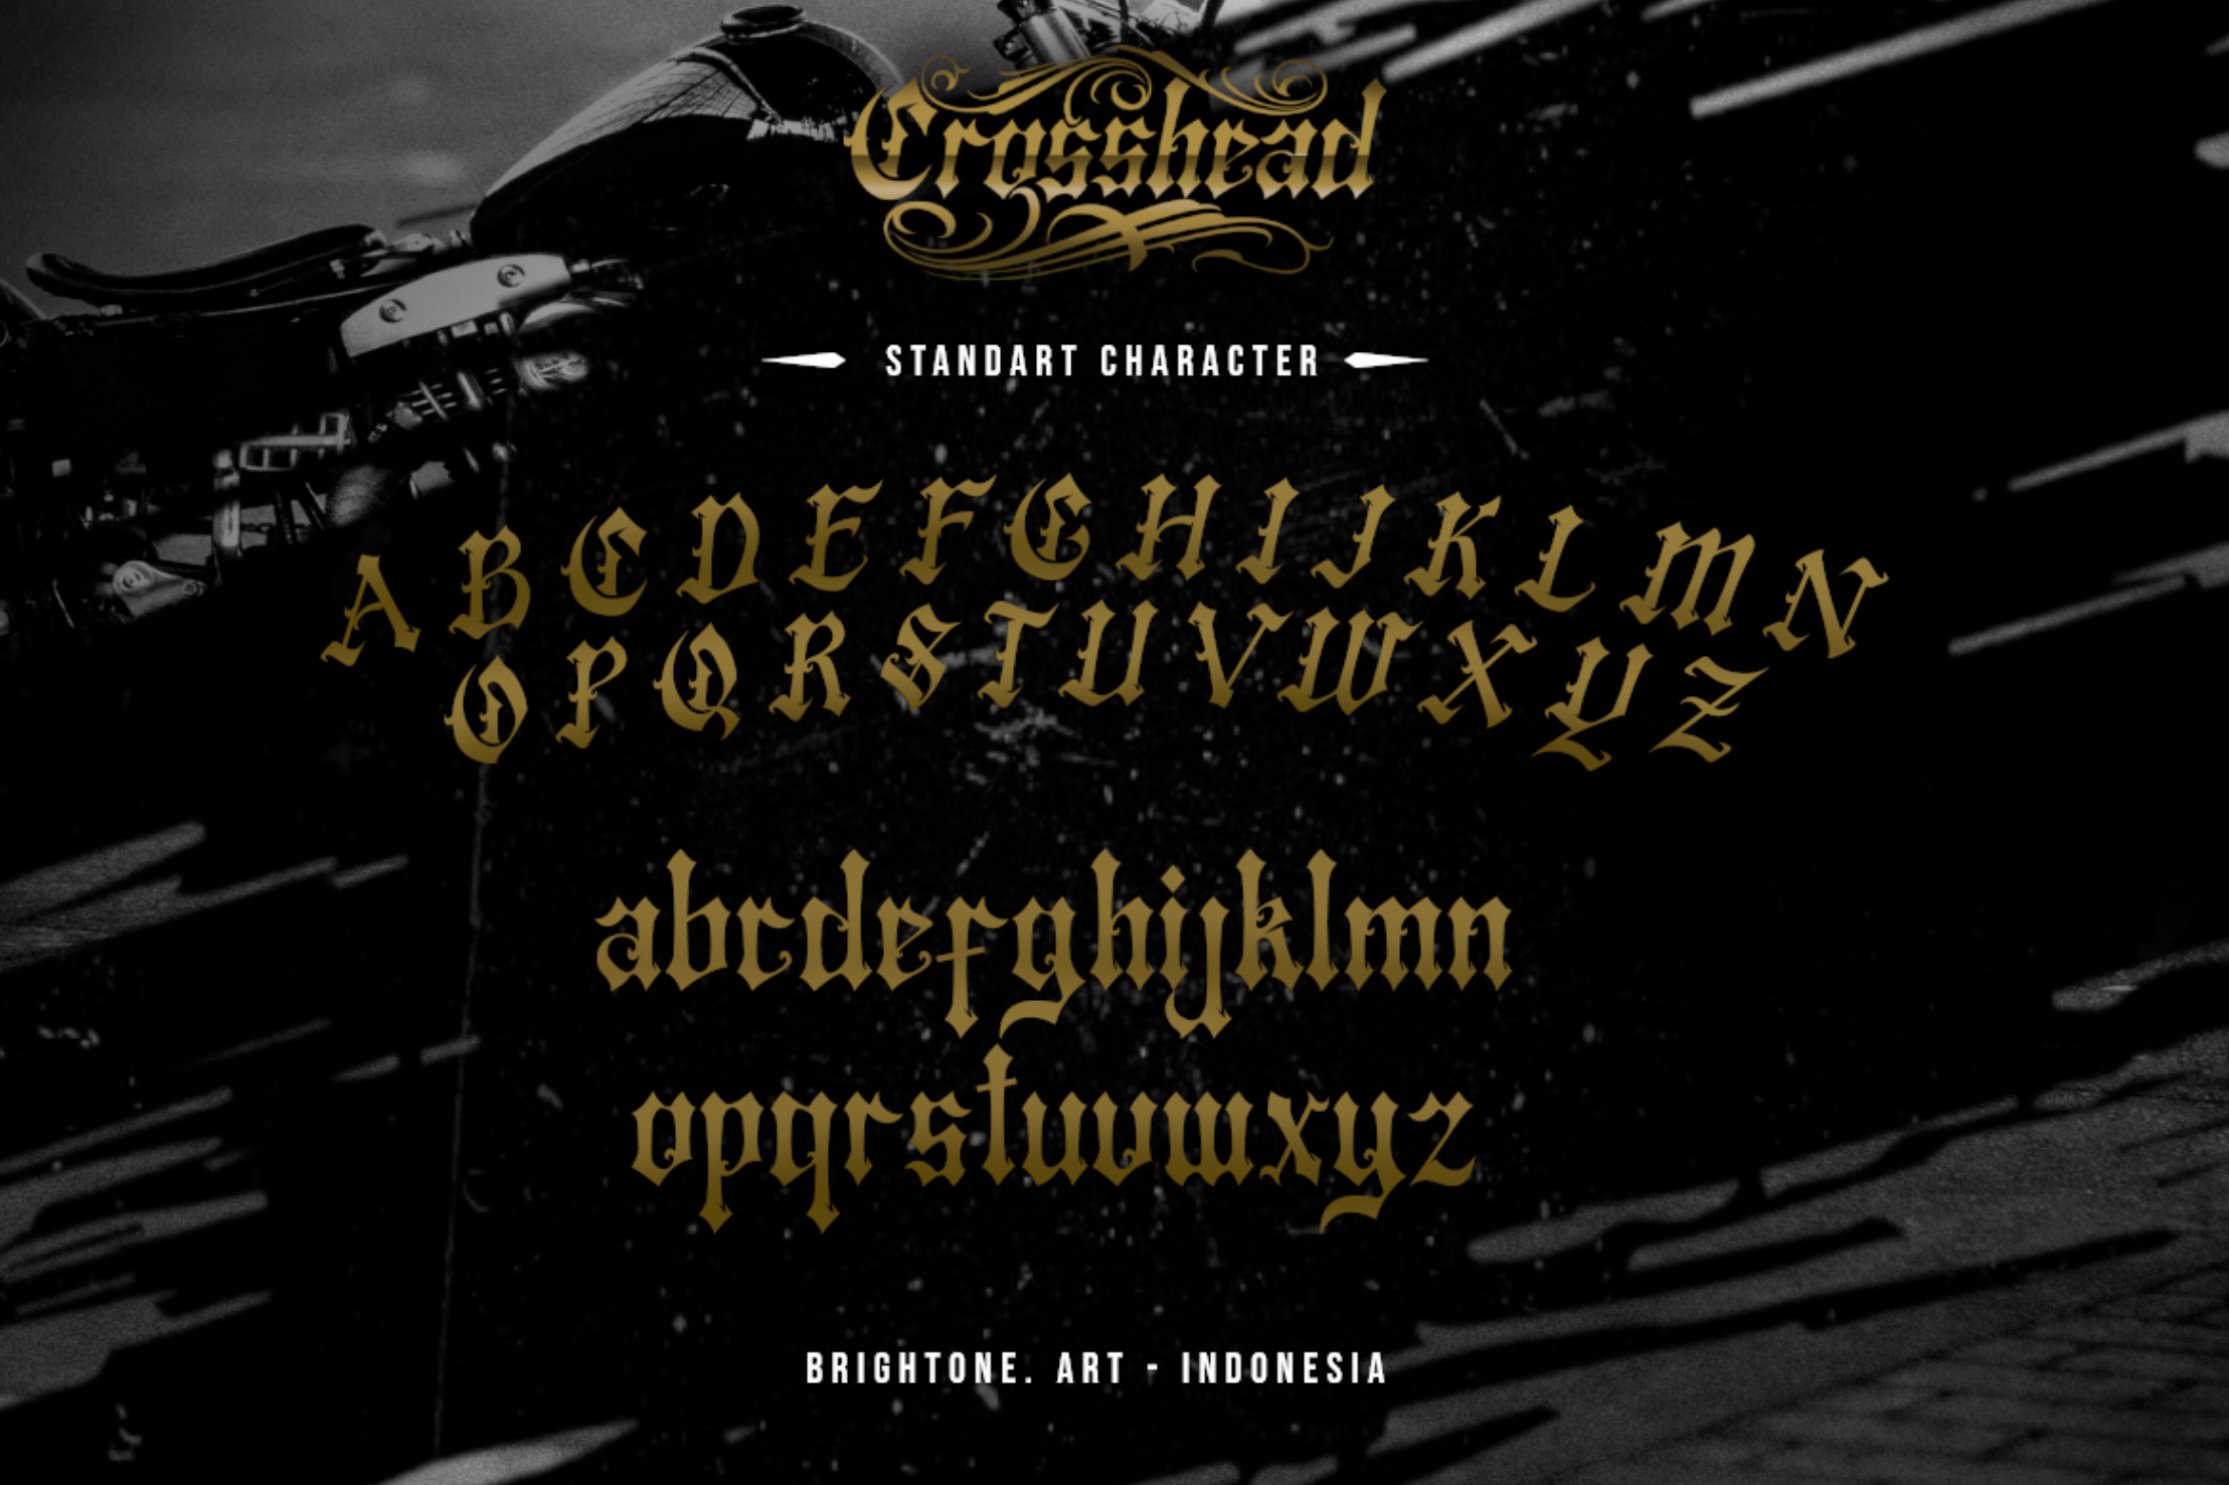 Crosshead - Blackletter type font preview image.